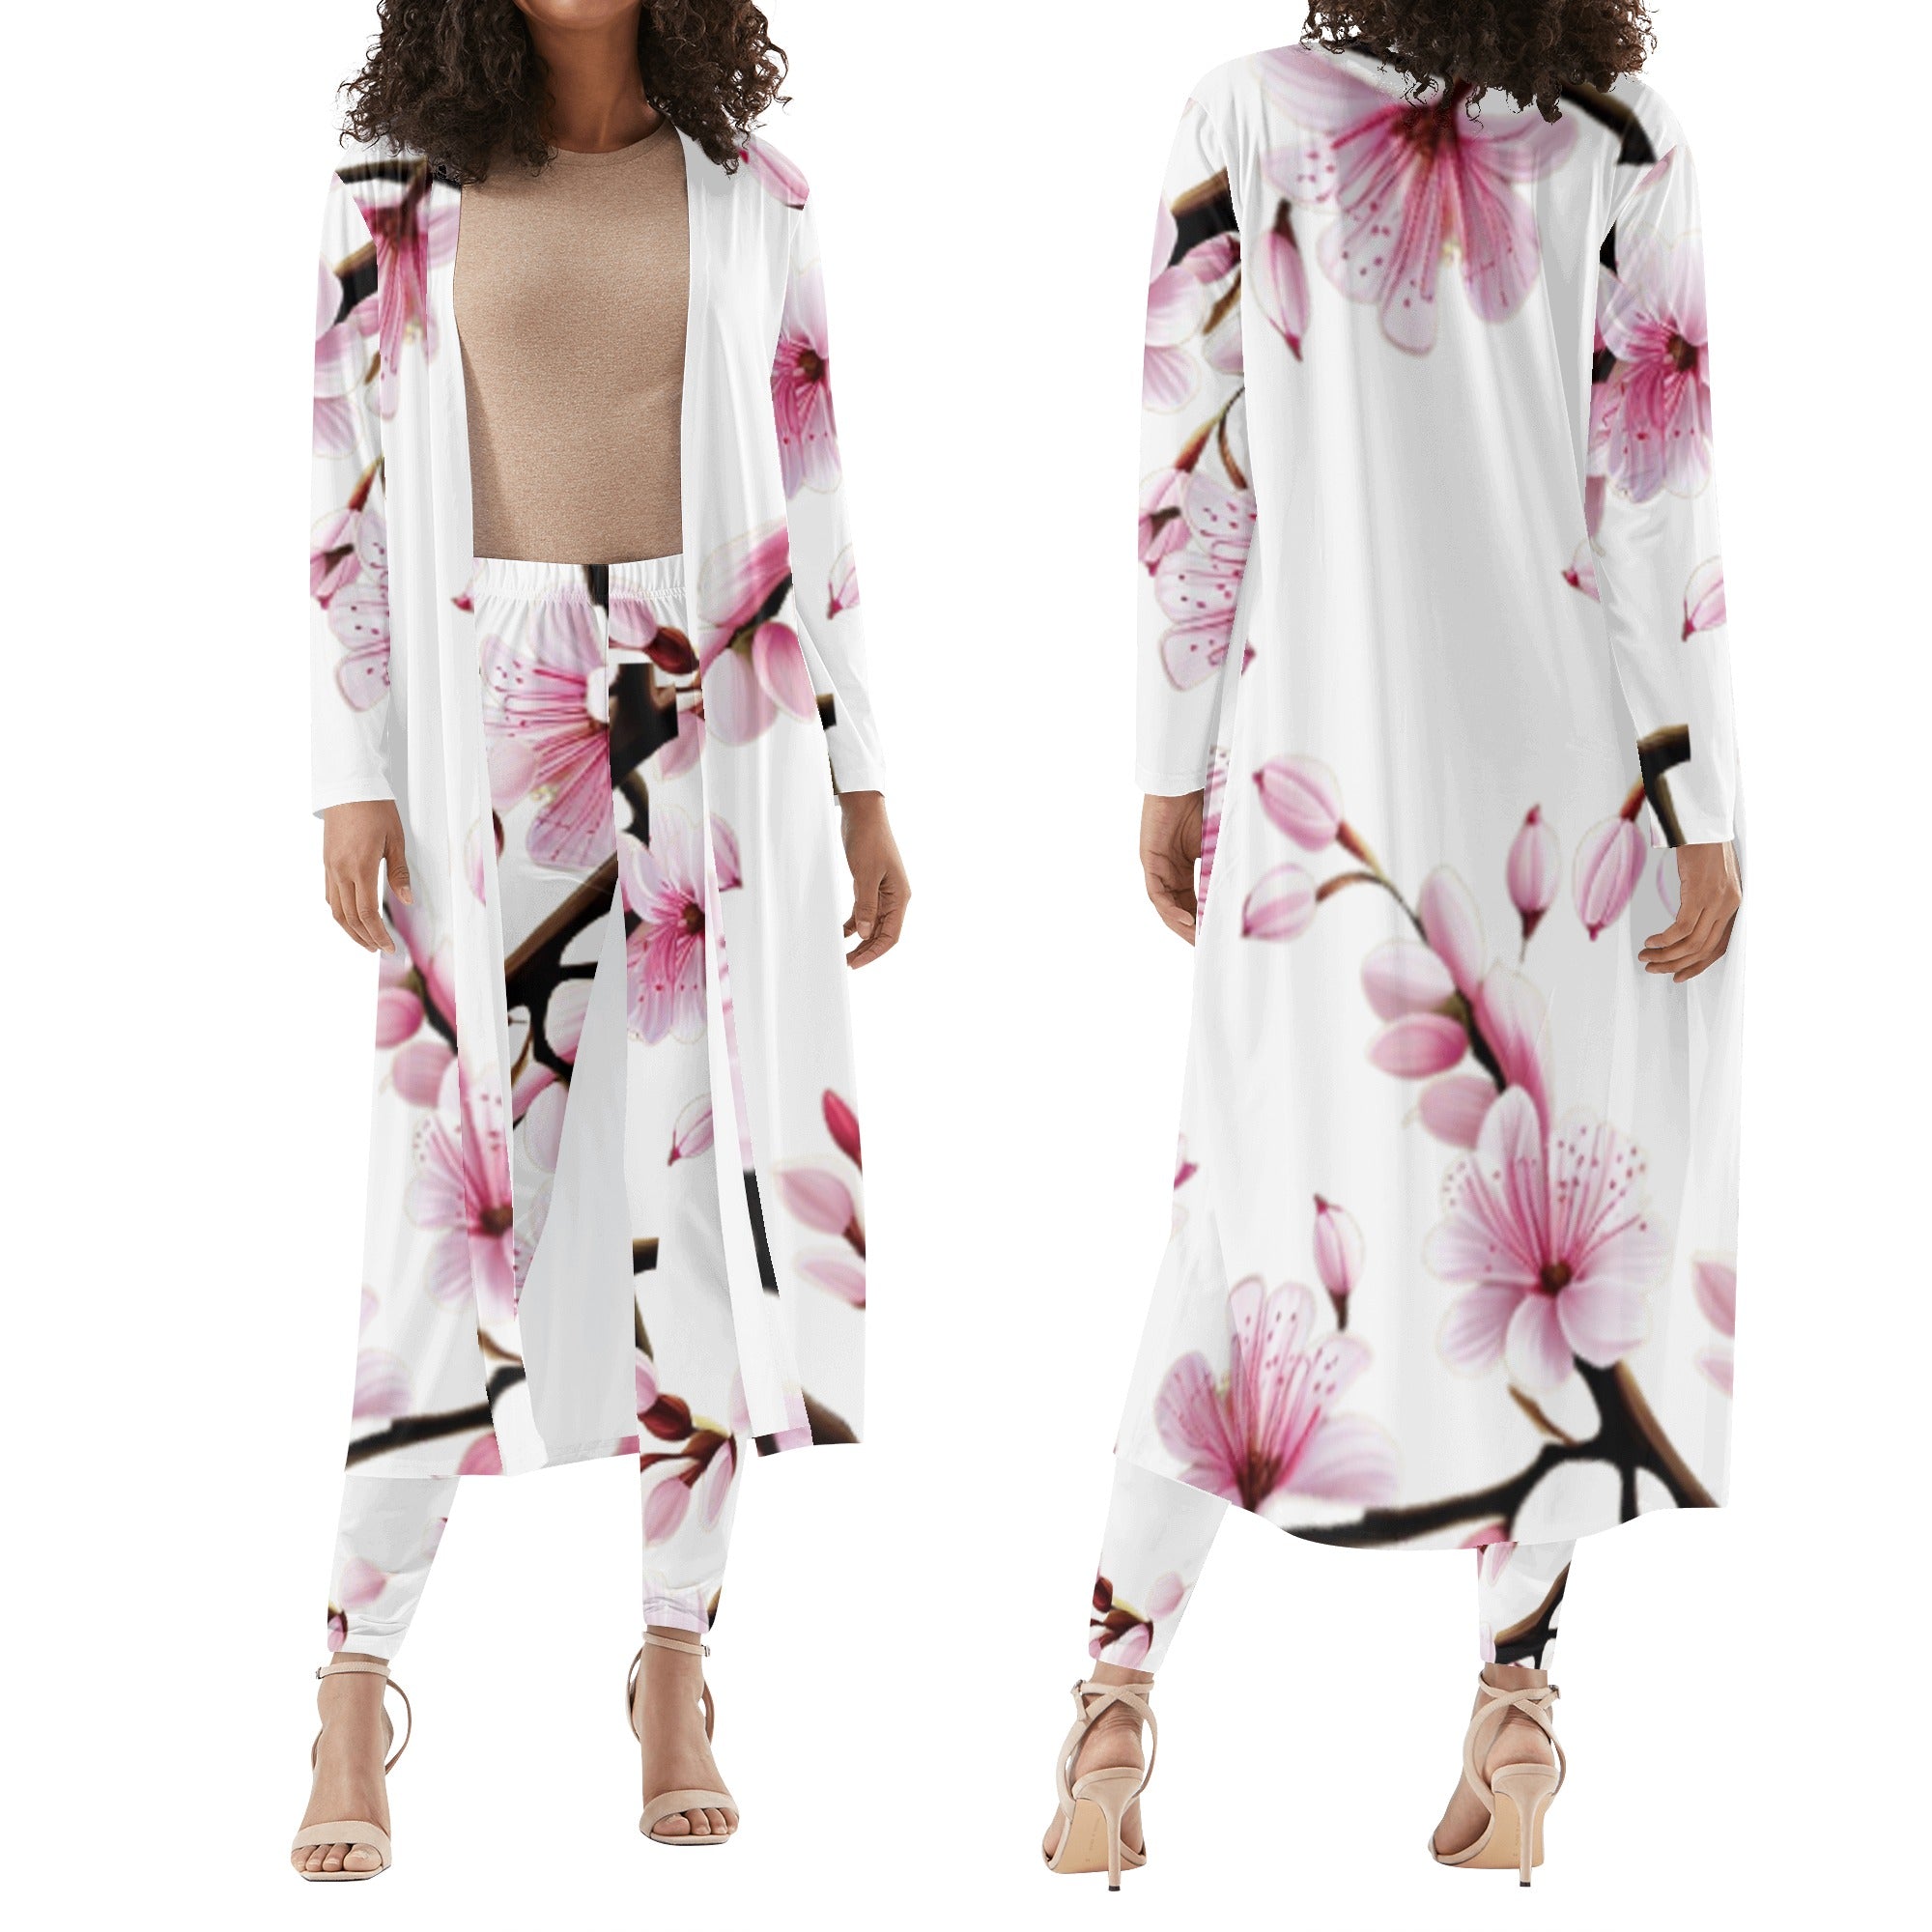 4 - White - Cherry Blossom Womens Long Sleeve Cardigan and Leggings 2pcs - 4 colors - womens pants set at TFC&H Co.